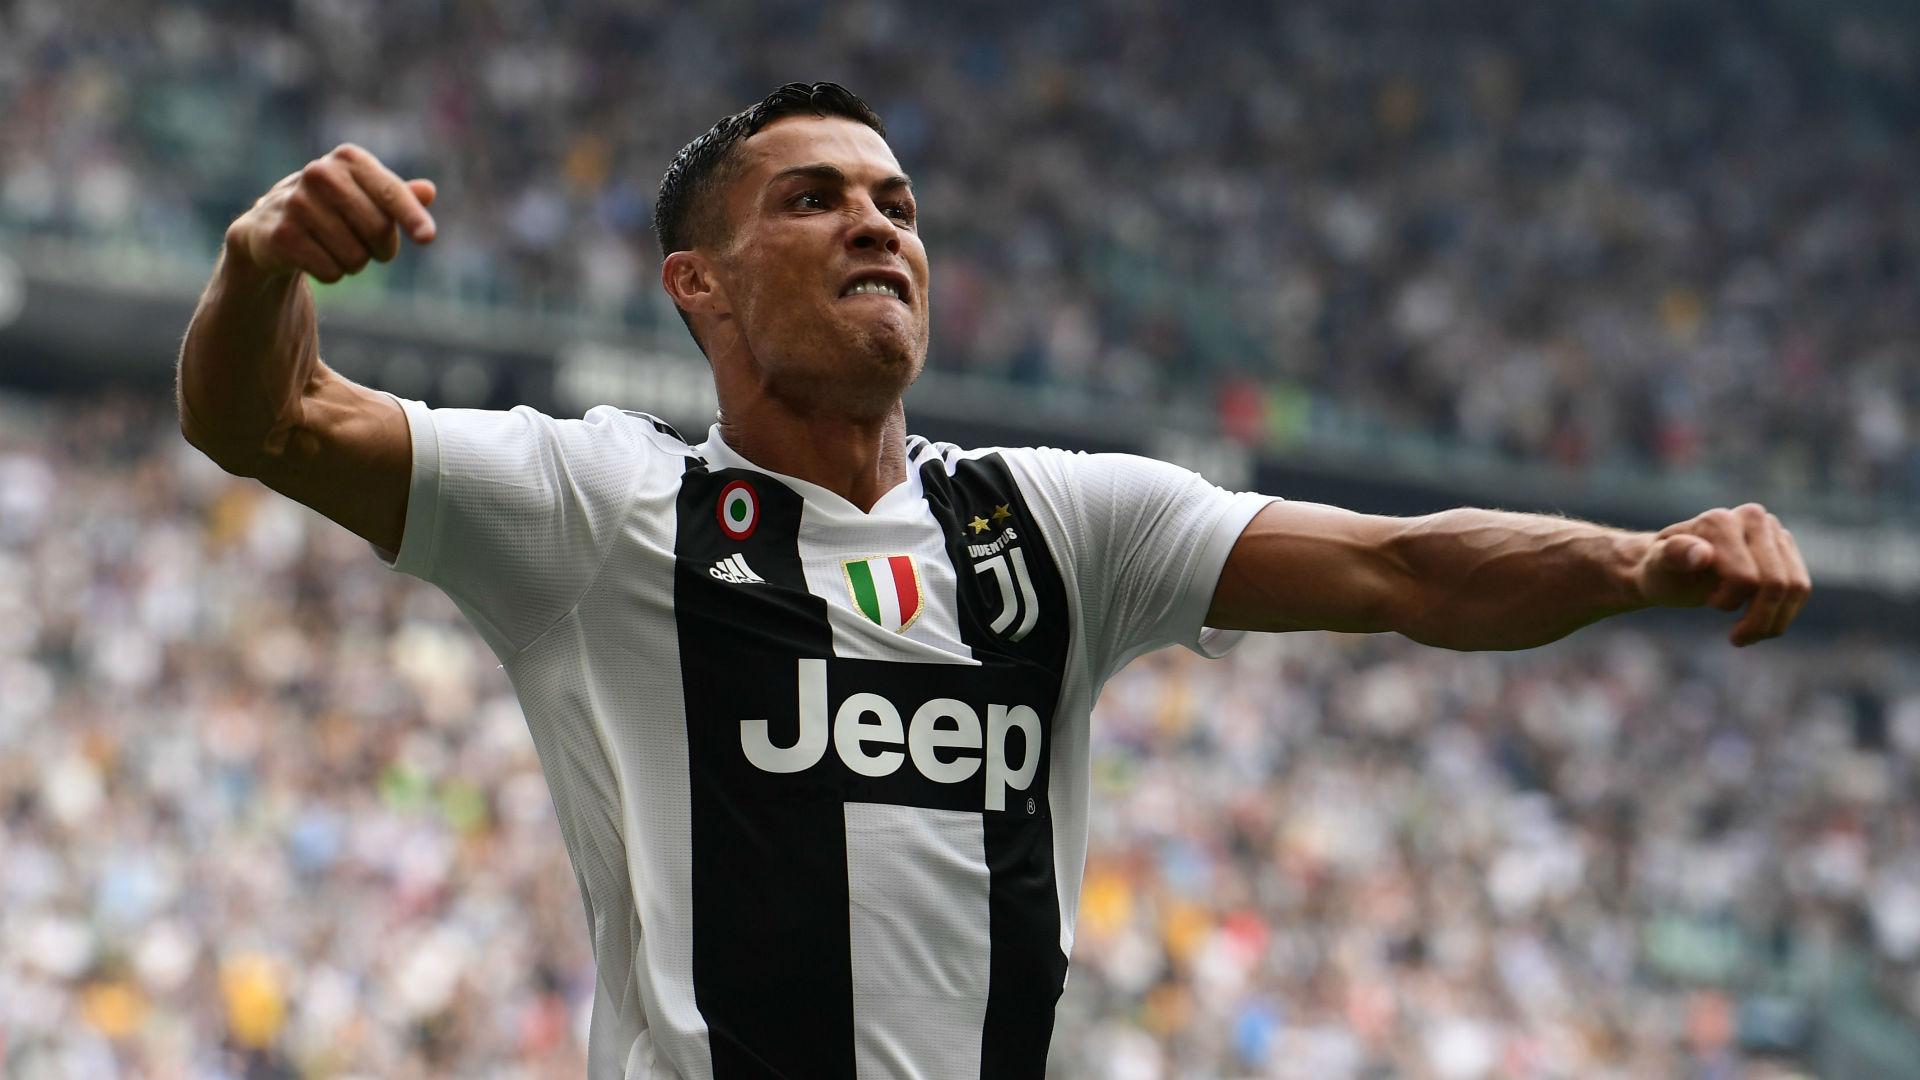 Serie A: Cristiano Ronaldo at Juventus: Goals, assists, results